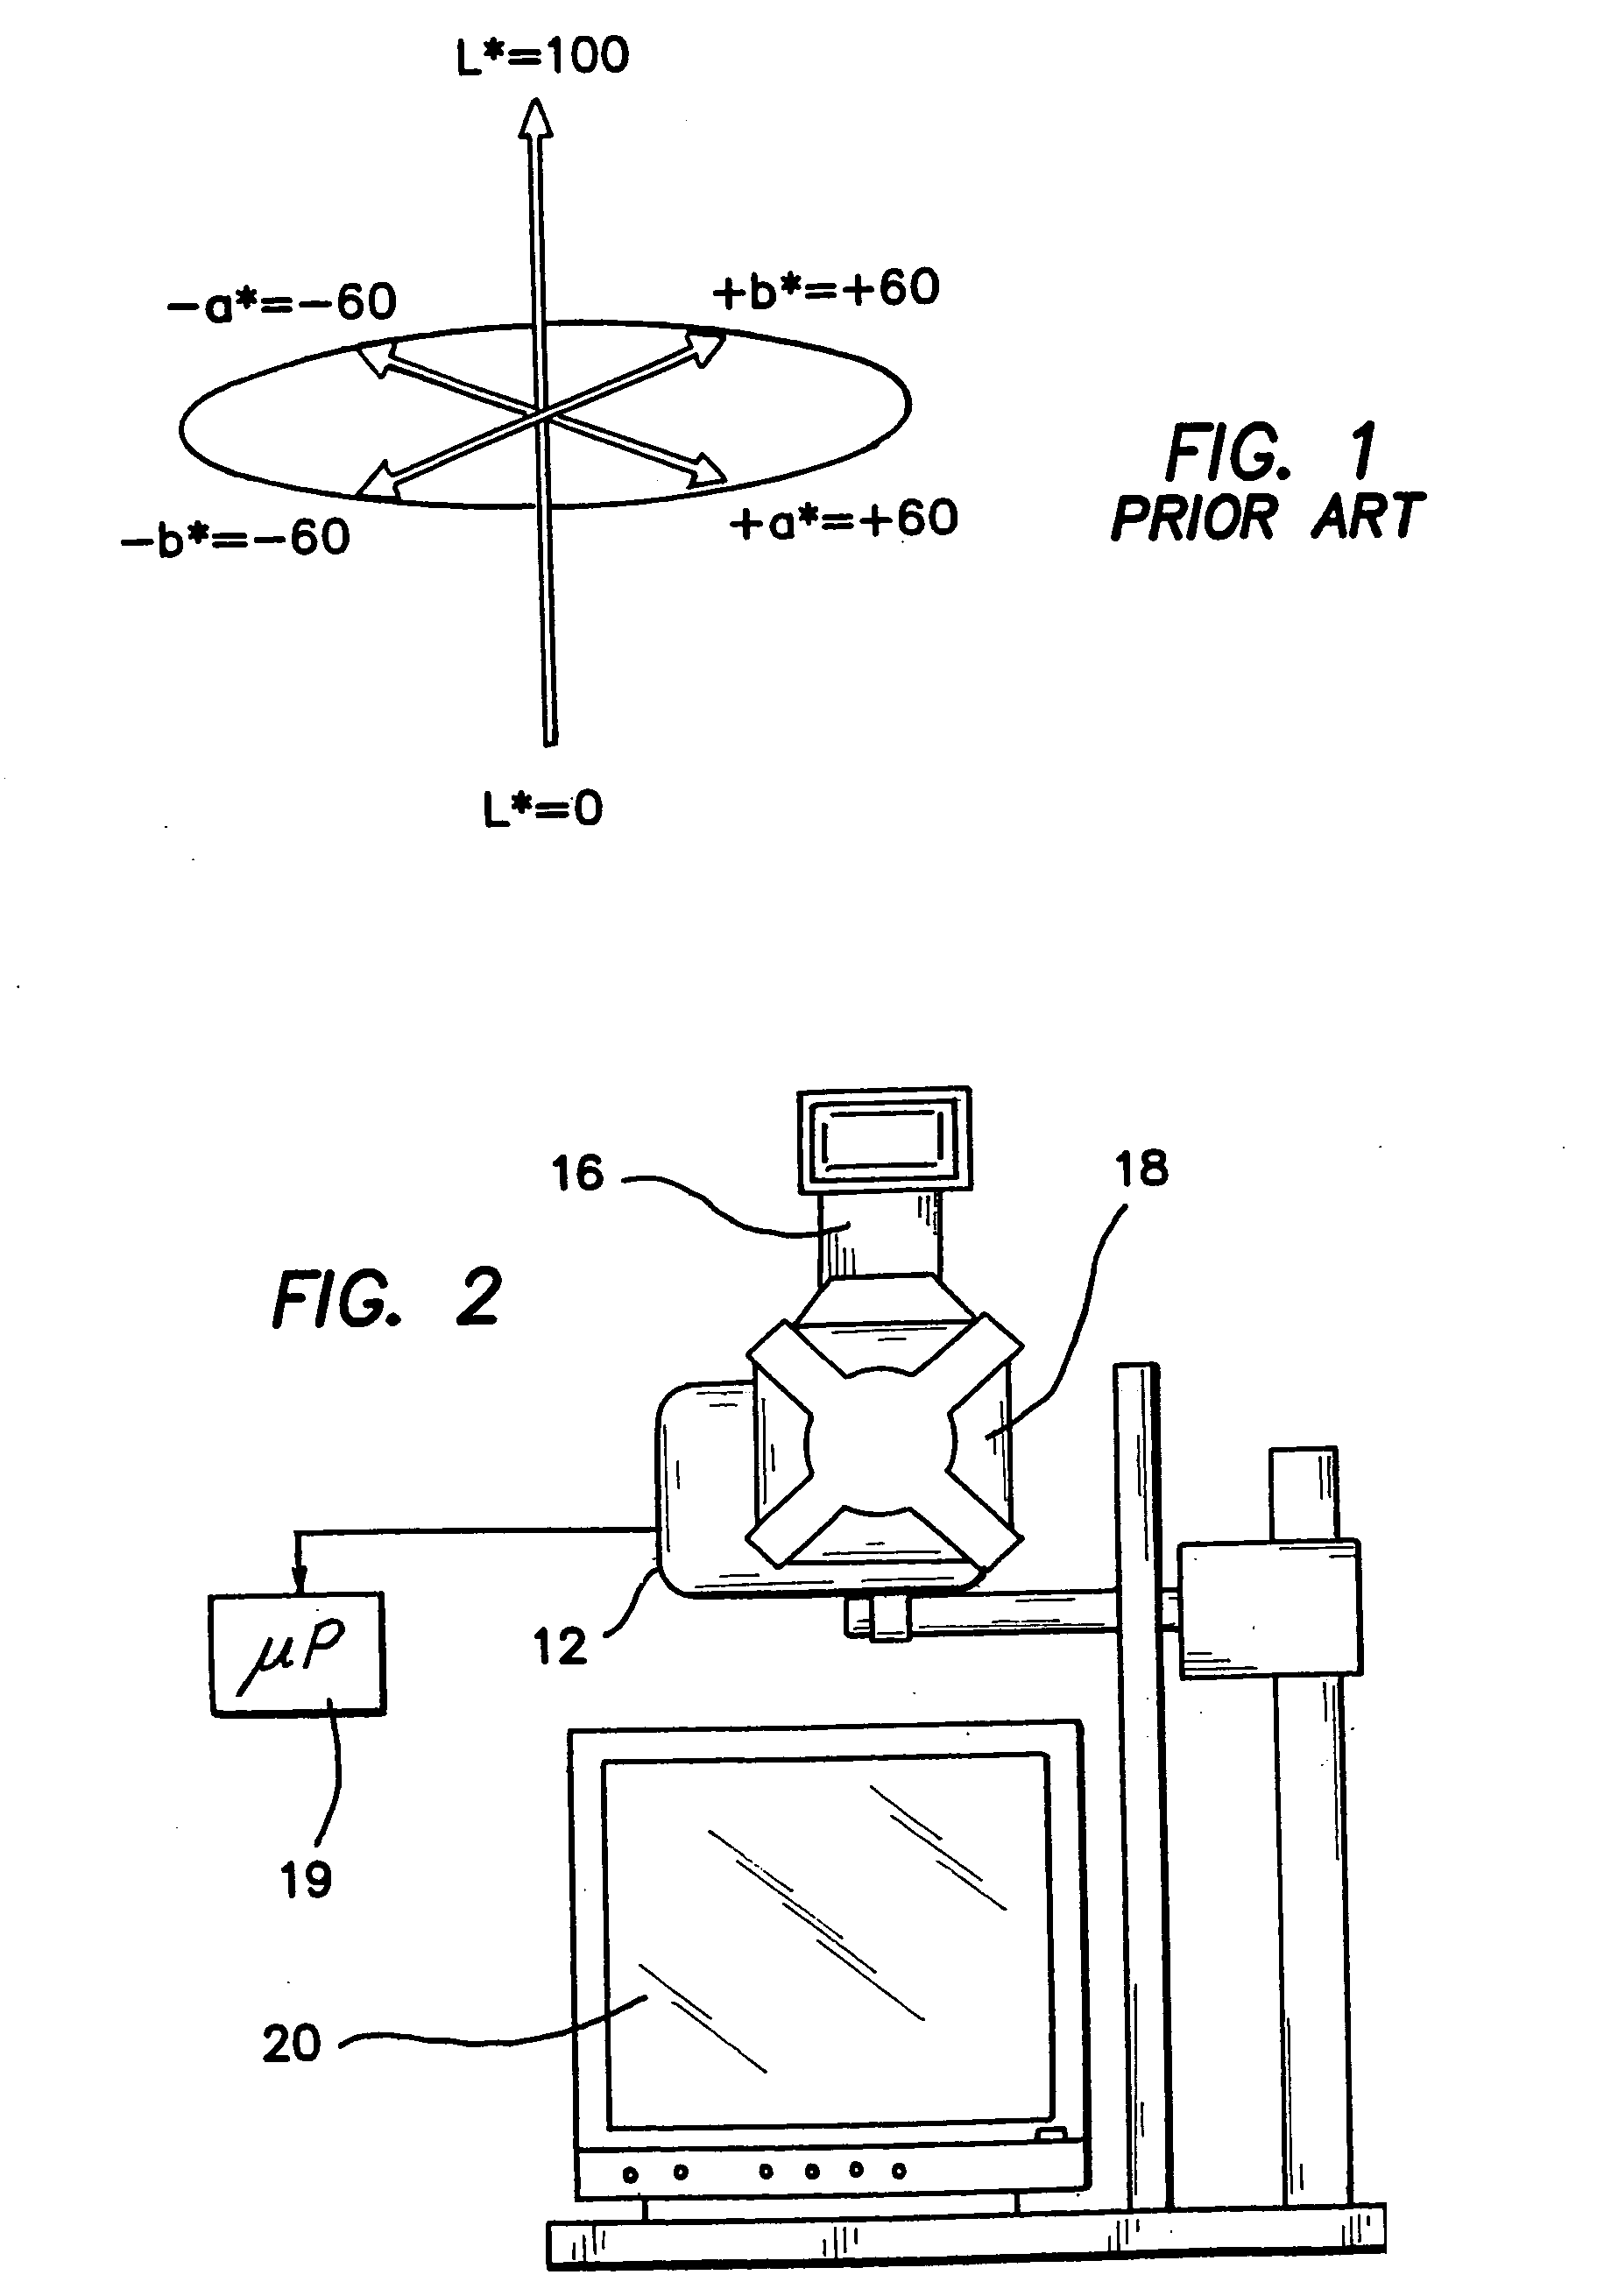 Method and apparatus for characterization of chromophore content and distribution in skin using cross-polarized diffuse reflectance imaging